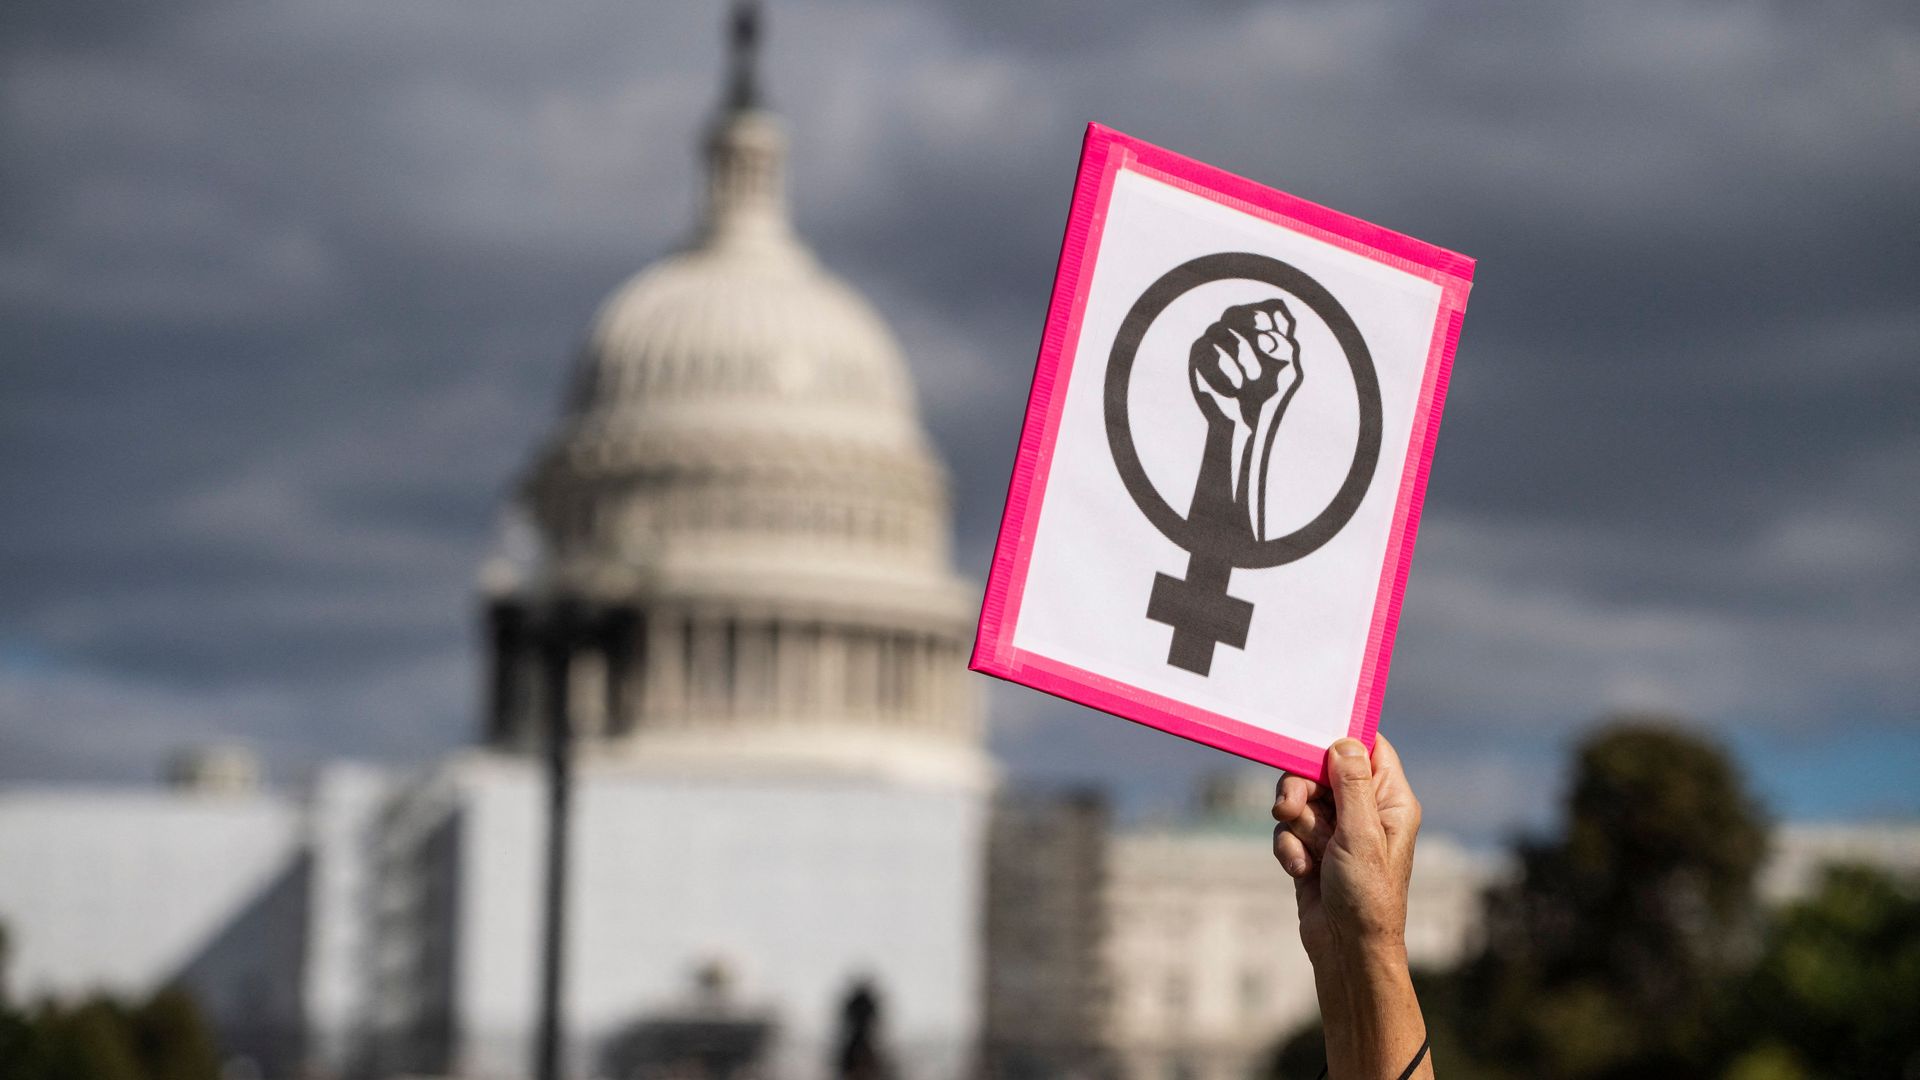 Photo of a hand raising an abortion rights sign against the backdrop of the U.S. Capitol